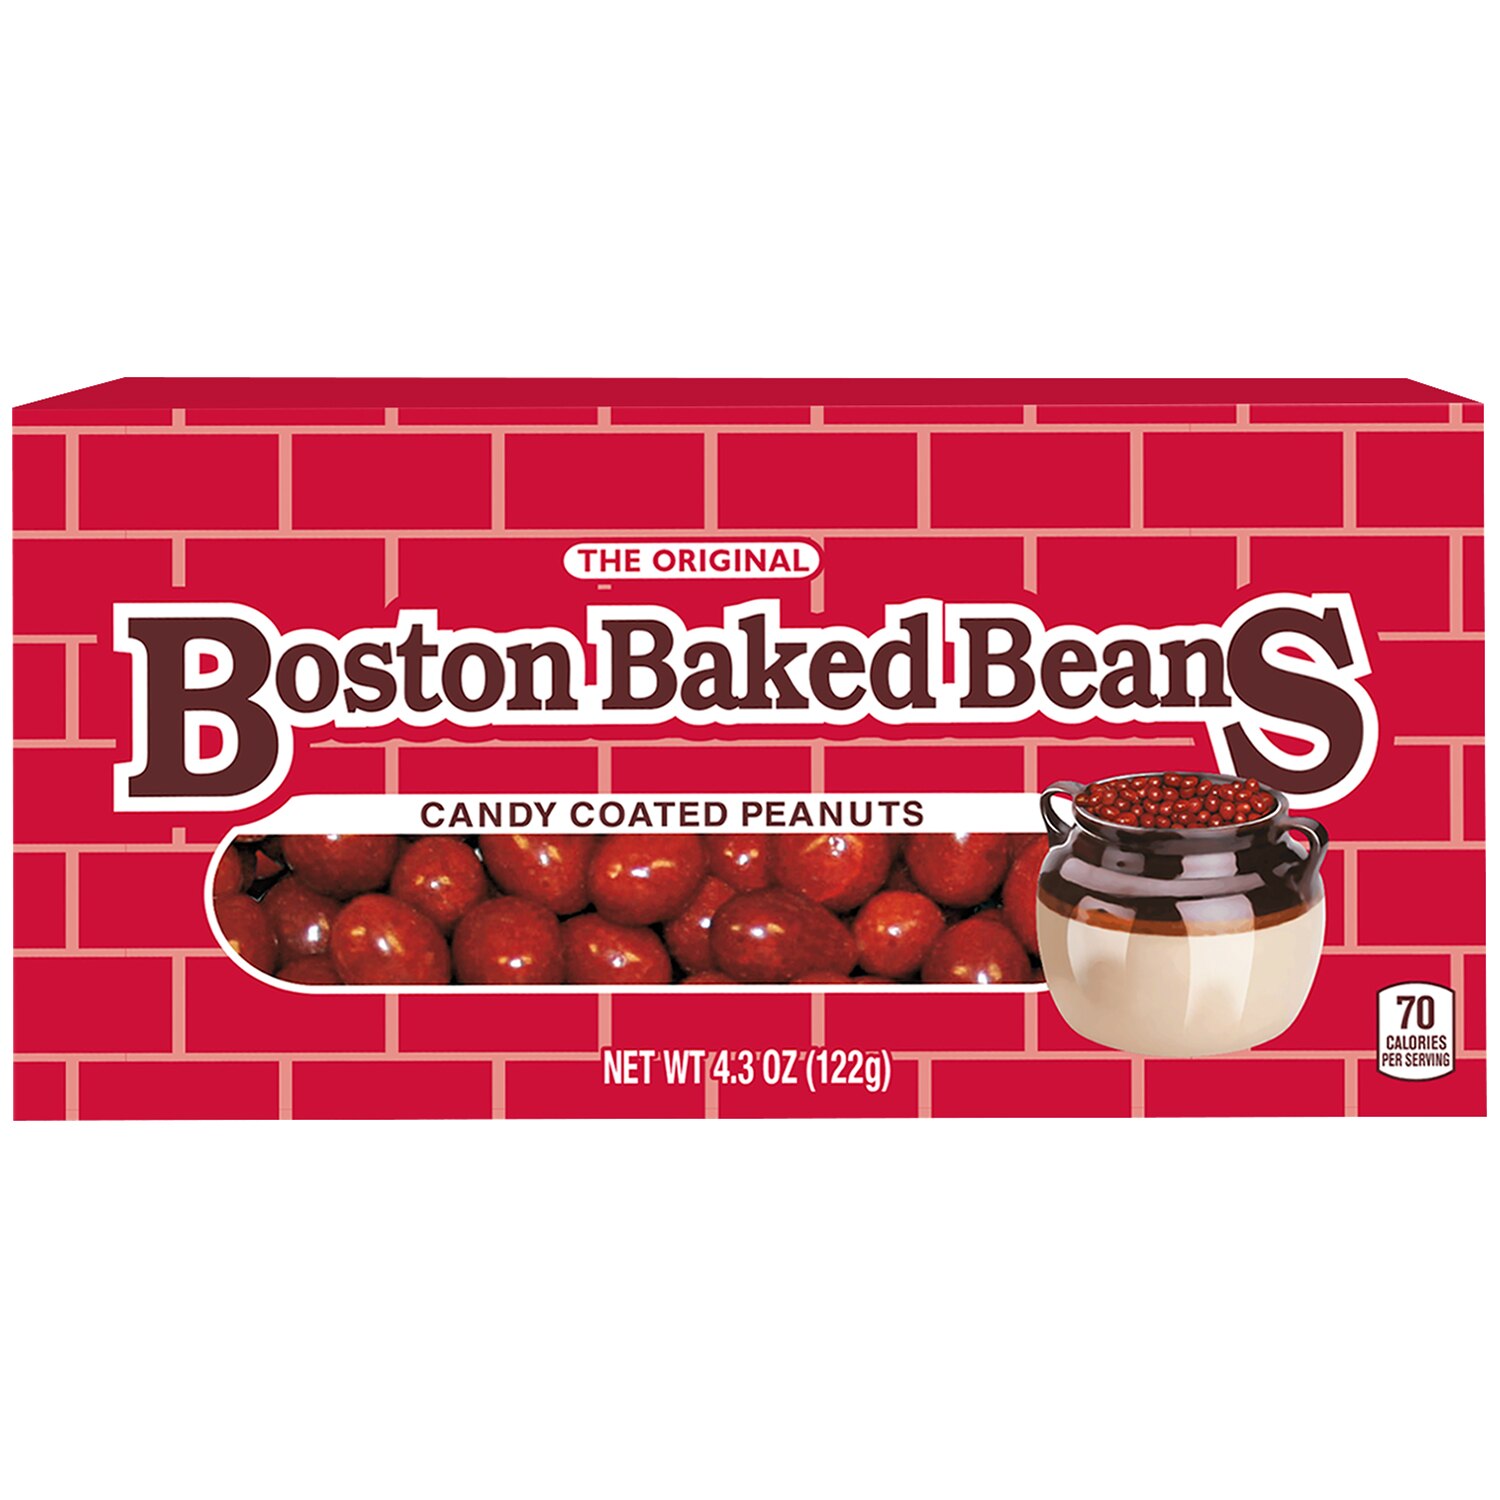 Boston Baked Beans Candy Coated Peanuts, 4.3 OZ